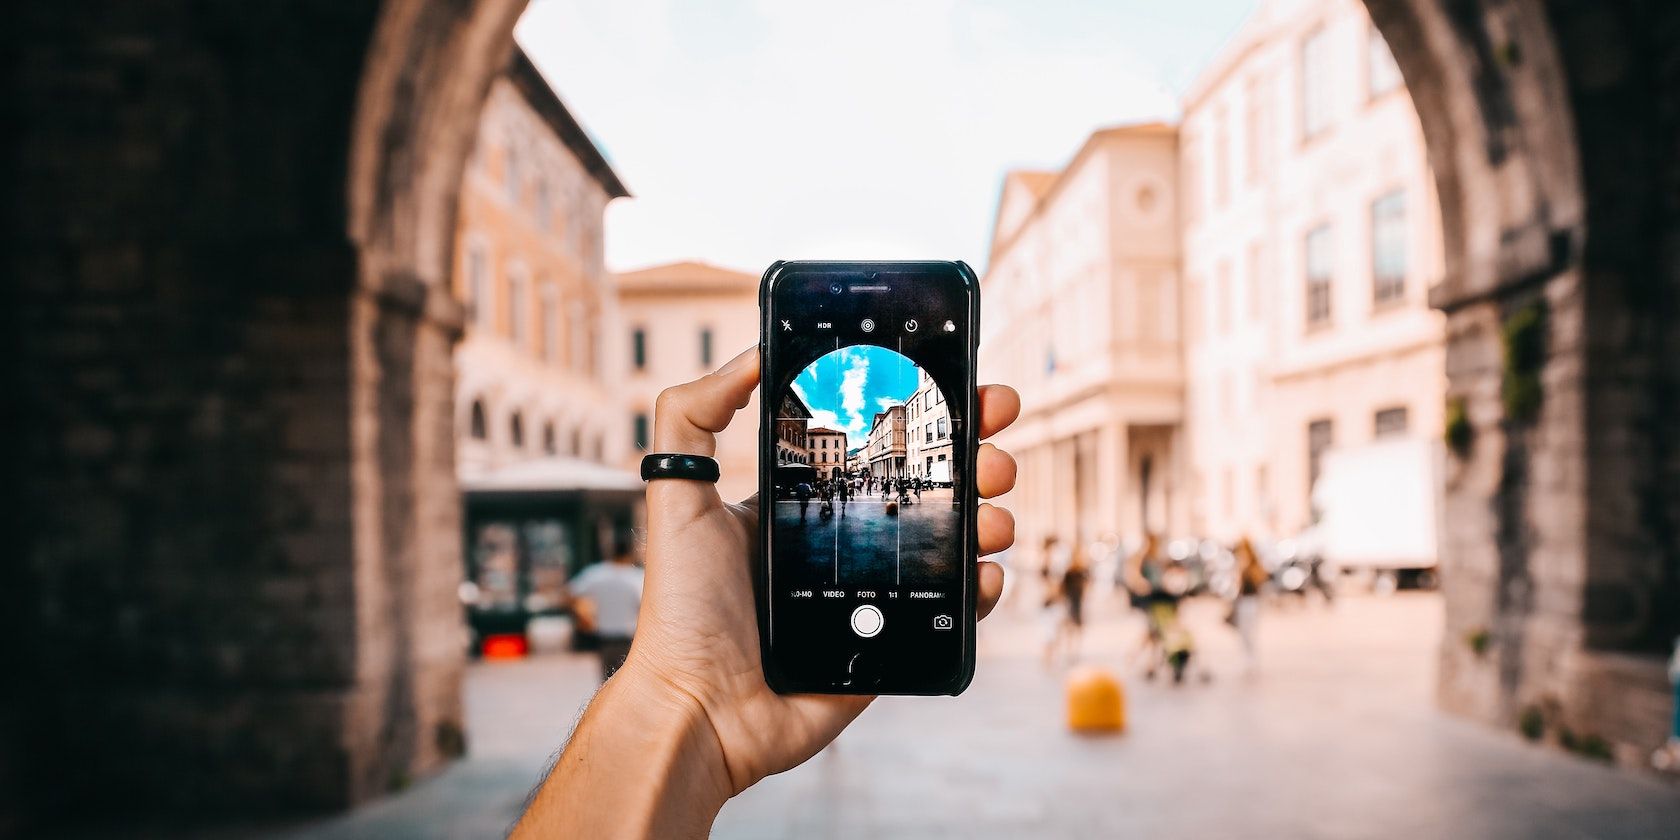 A hand holding a phone that is taking a picture of a street